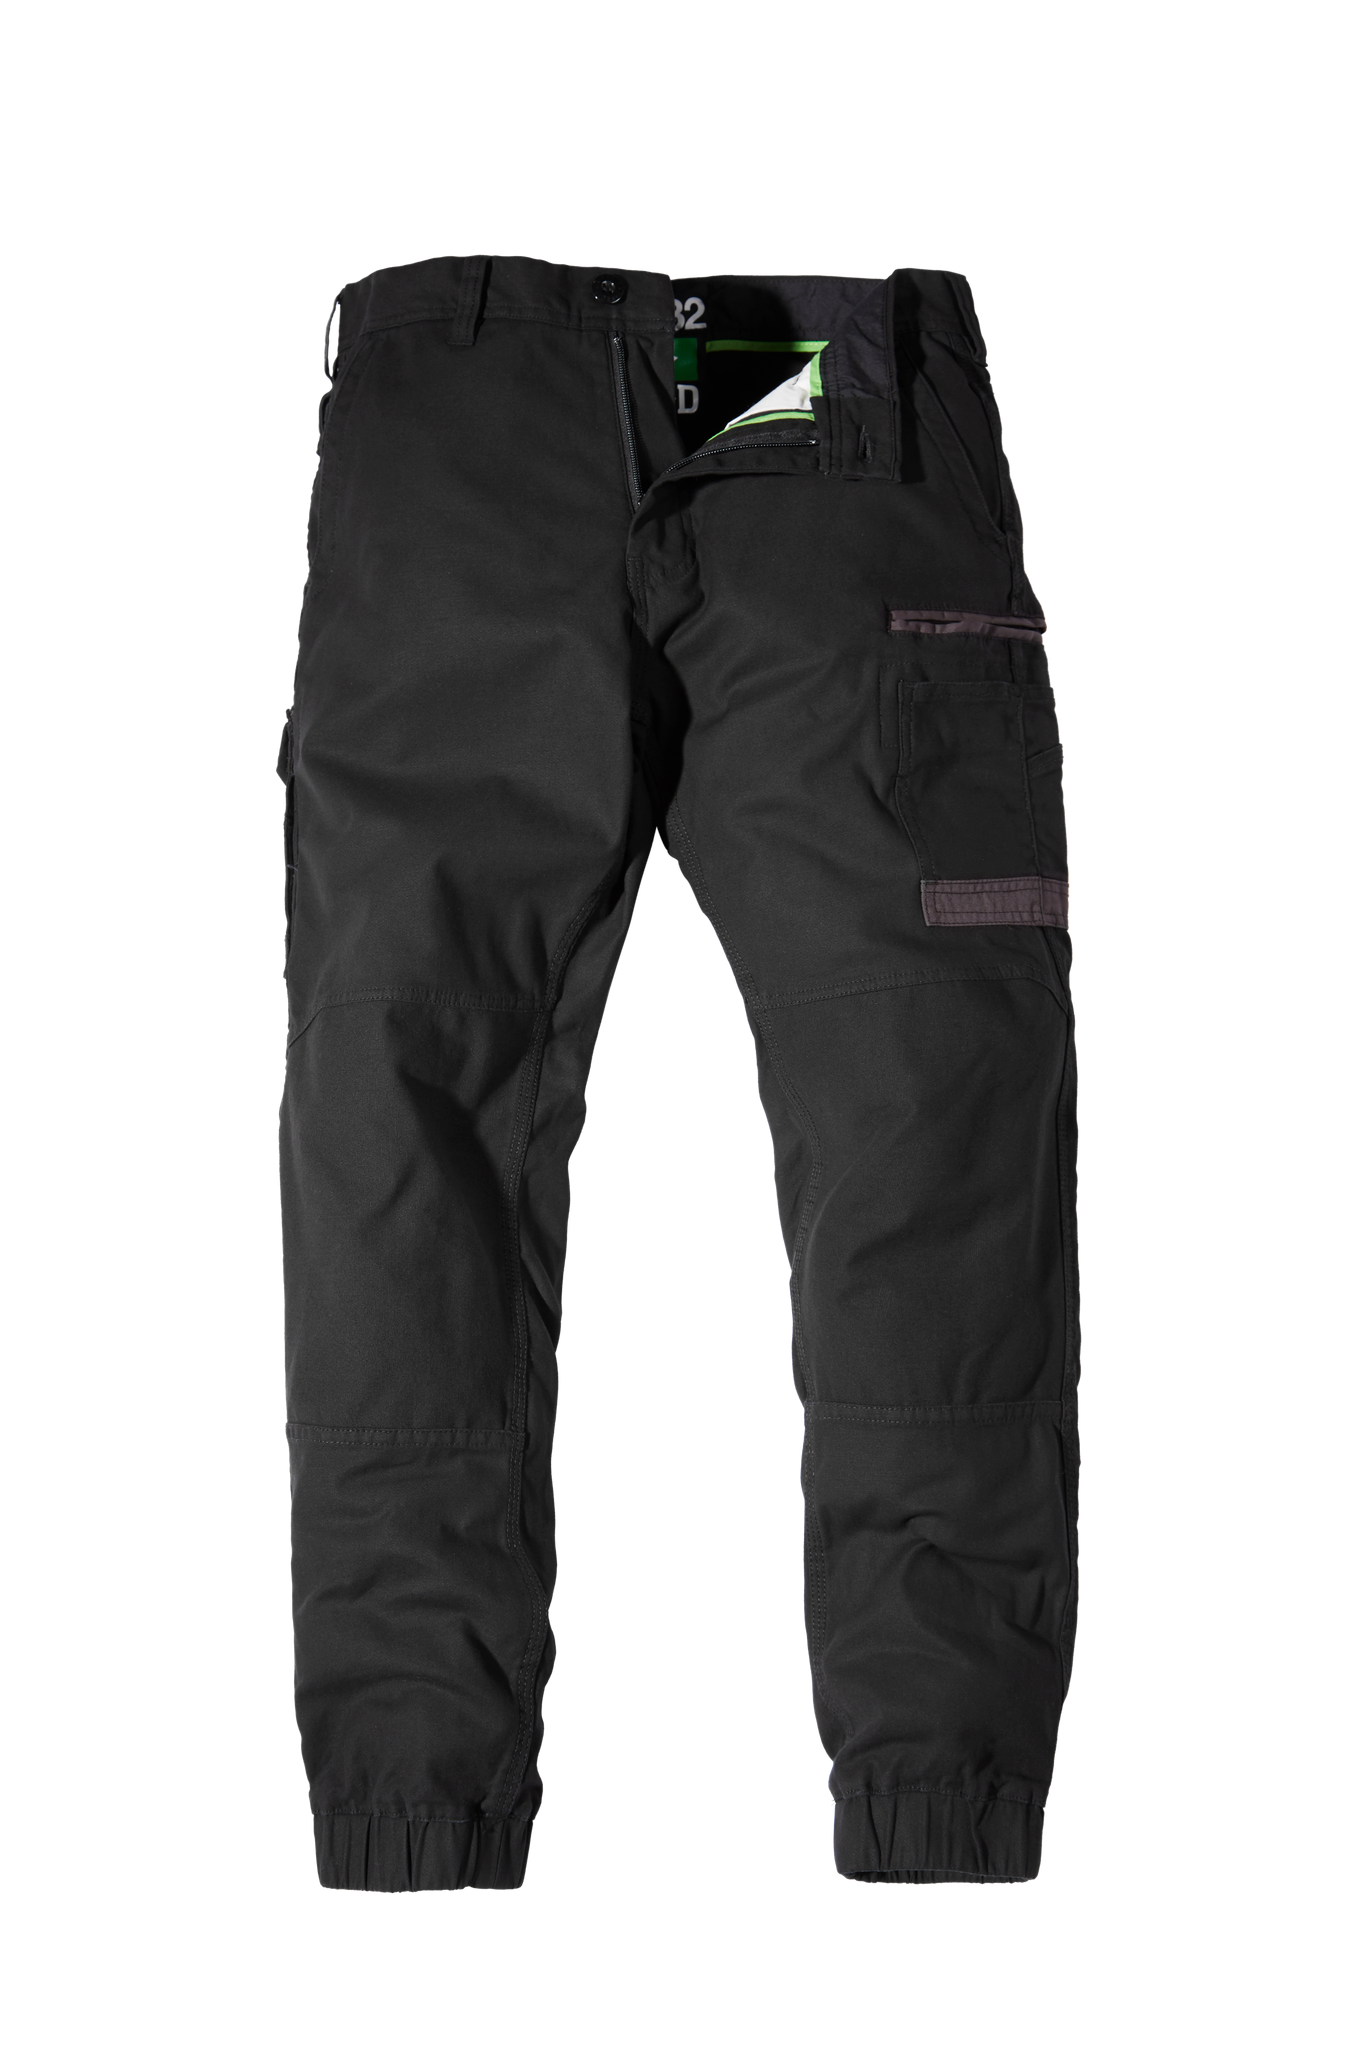 FXD WP-4 Pant